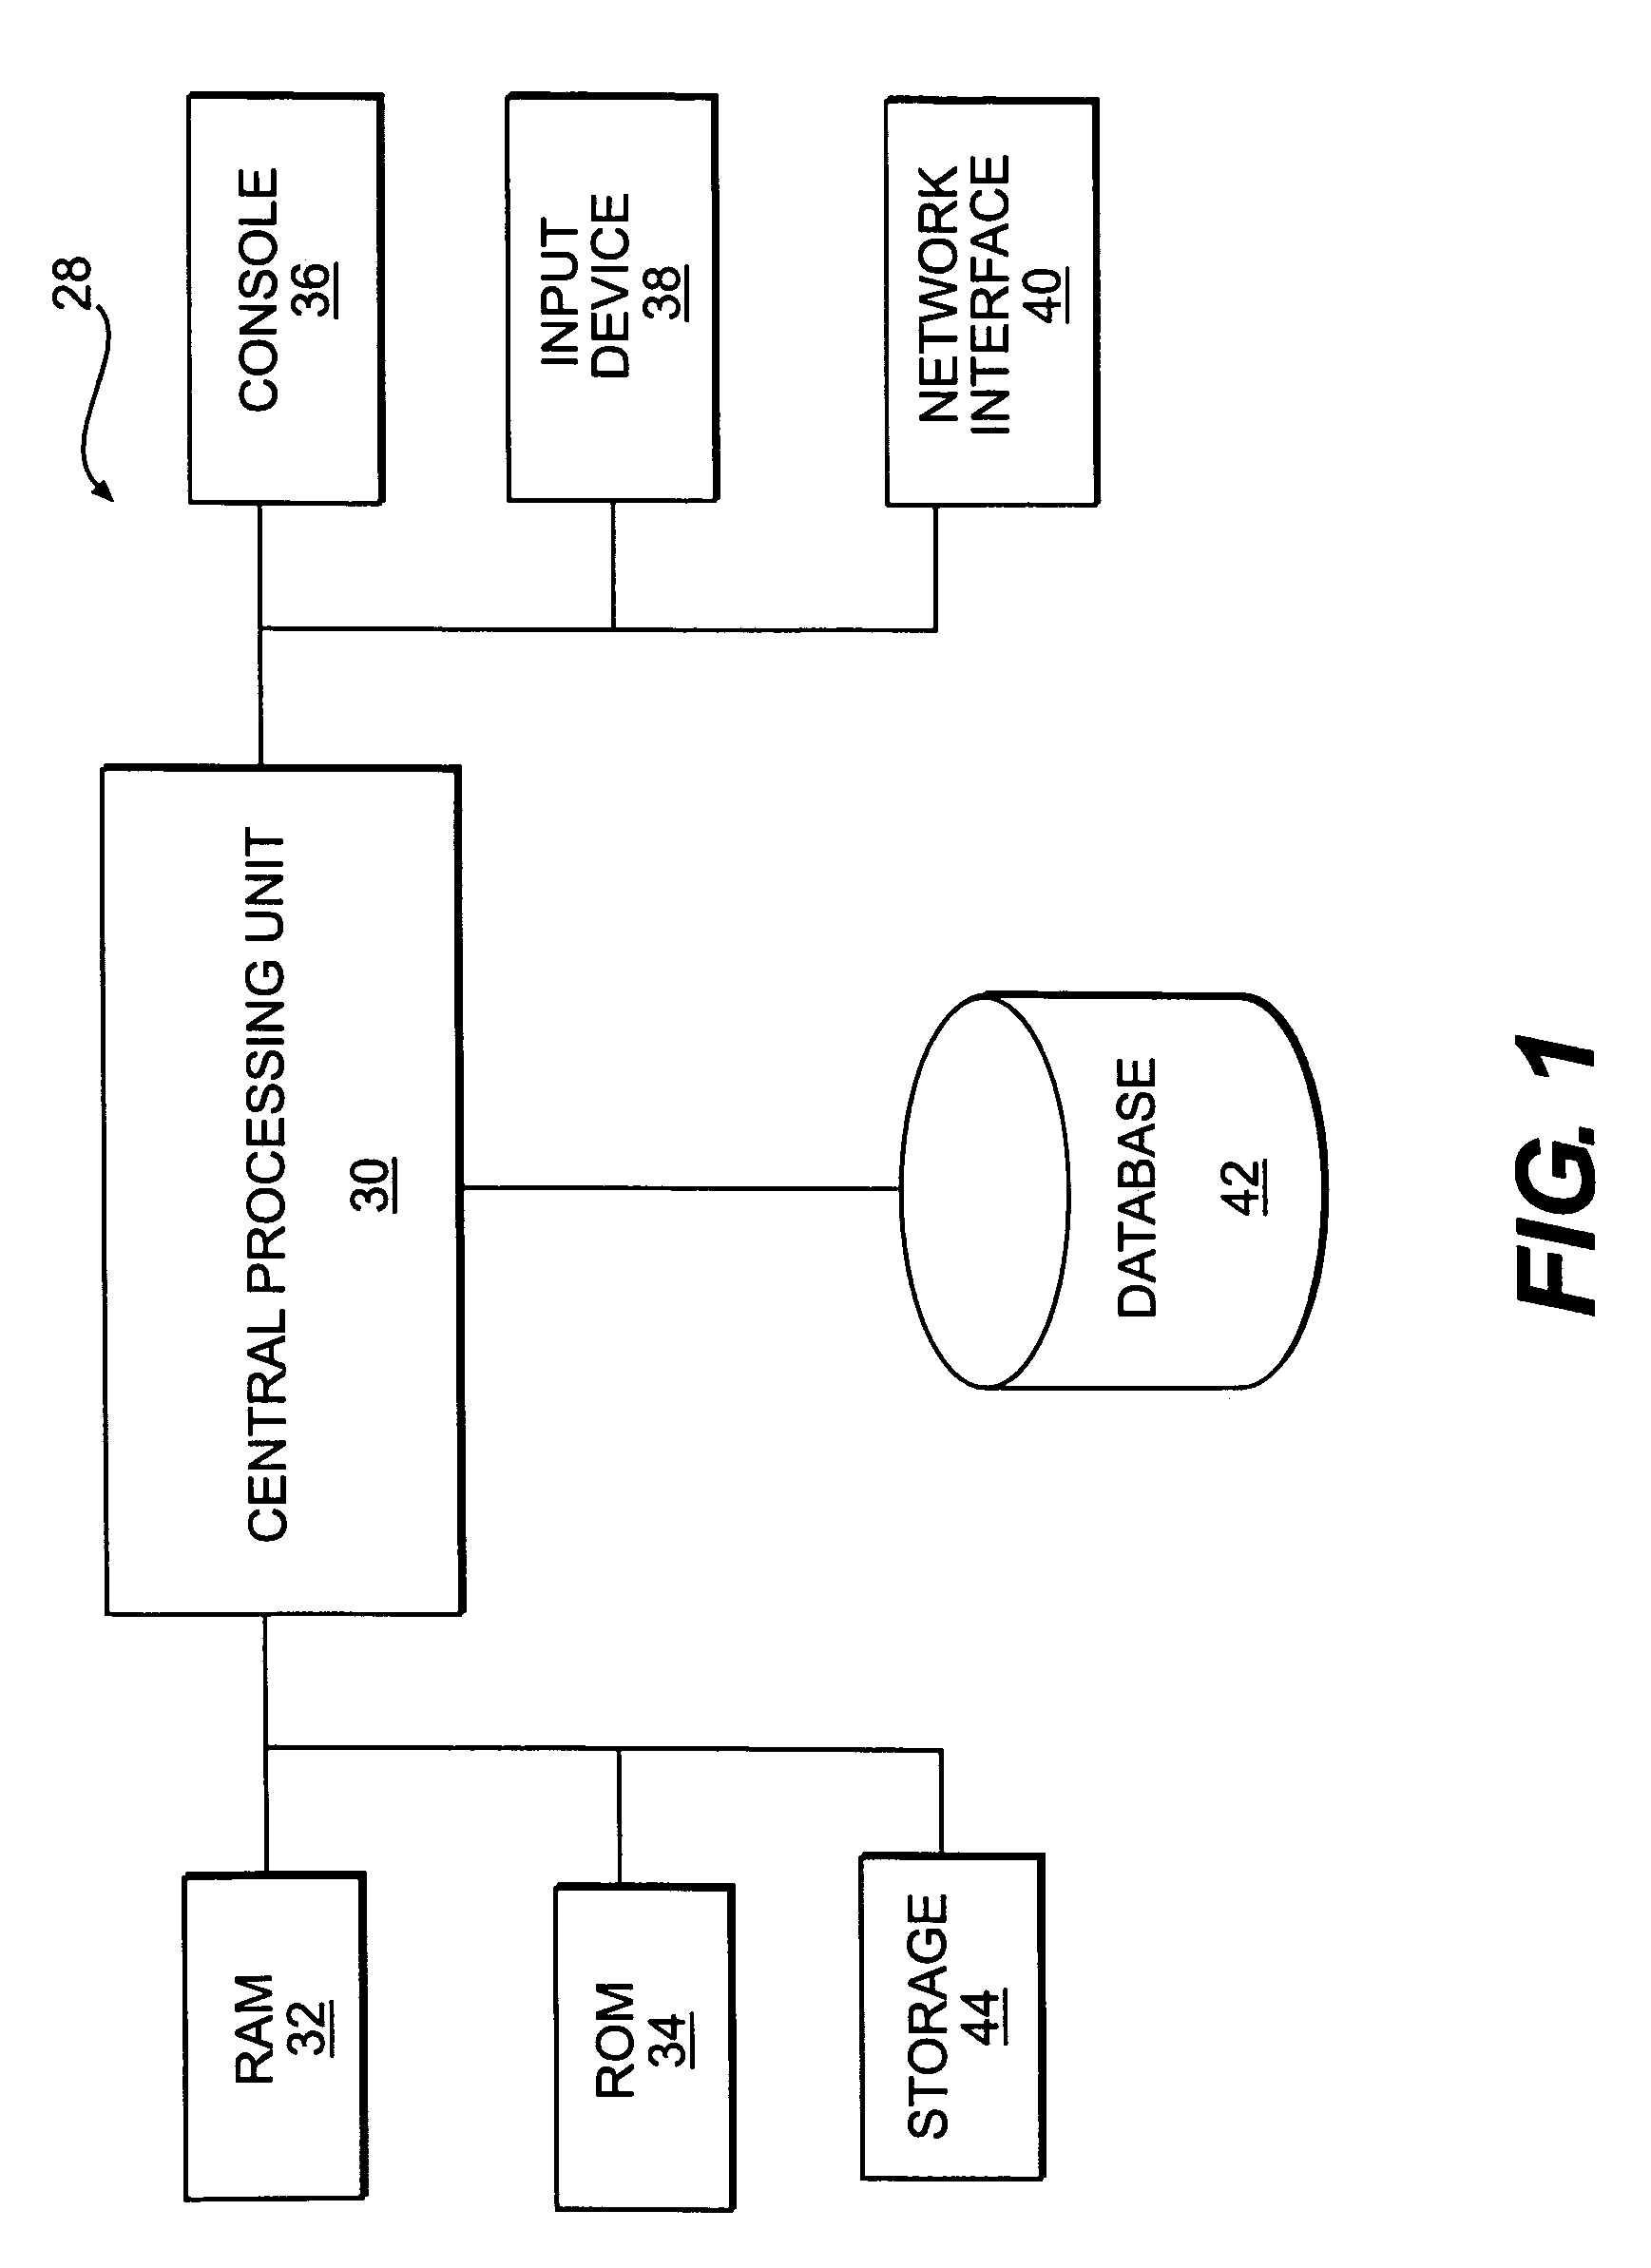 Method for predicting performance of a future product